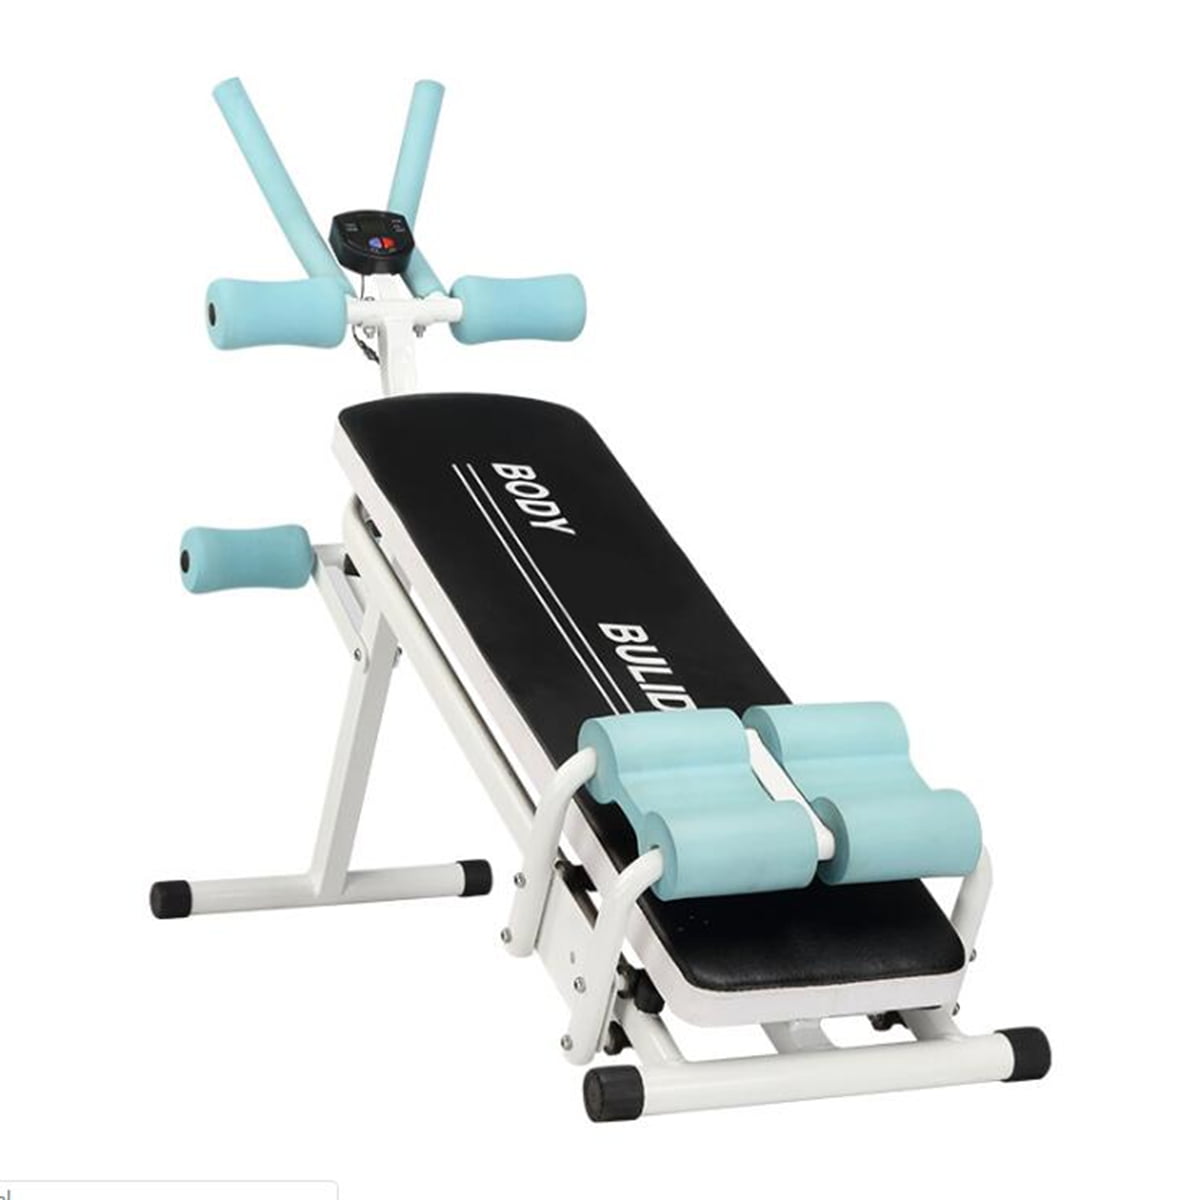 Flat Bench Load 600 lbs Multifunctional Exercise Bench Household Exercise Equipment Capacity Weight Bench for Weight Training and Ab Training Exercises Soft Foam Wear-Resistant Steel Sit Up Bench 